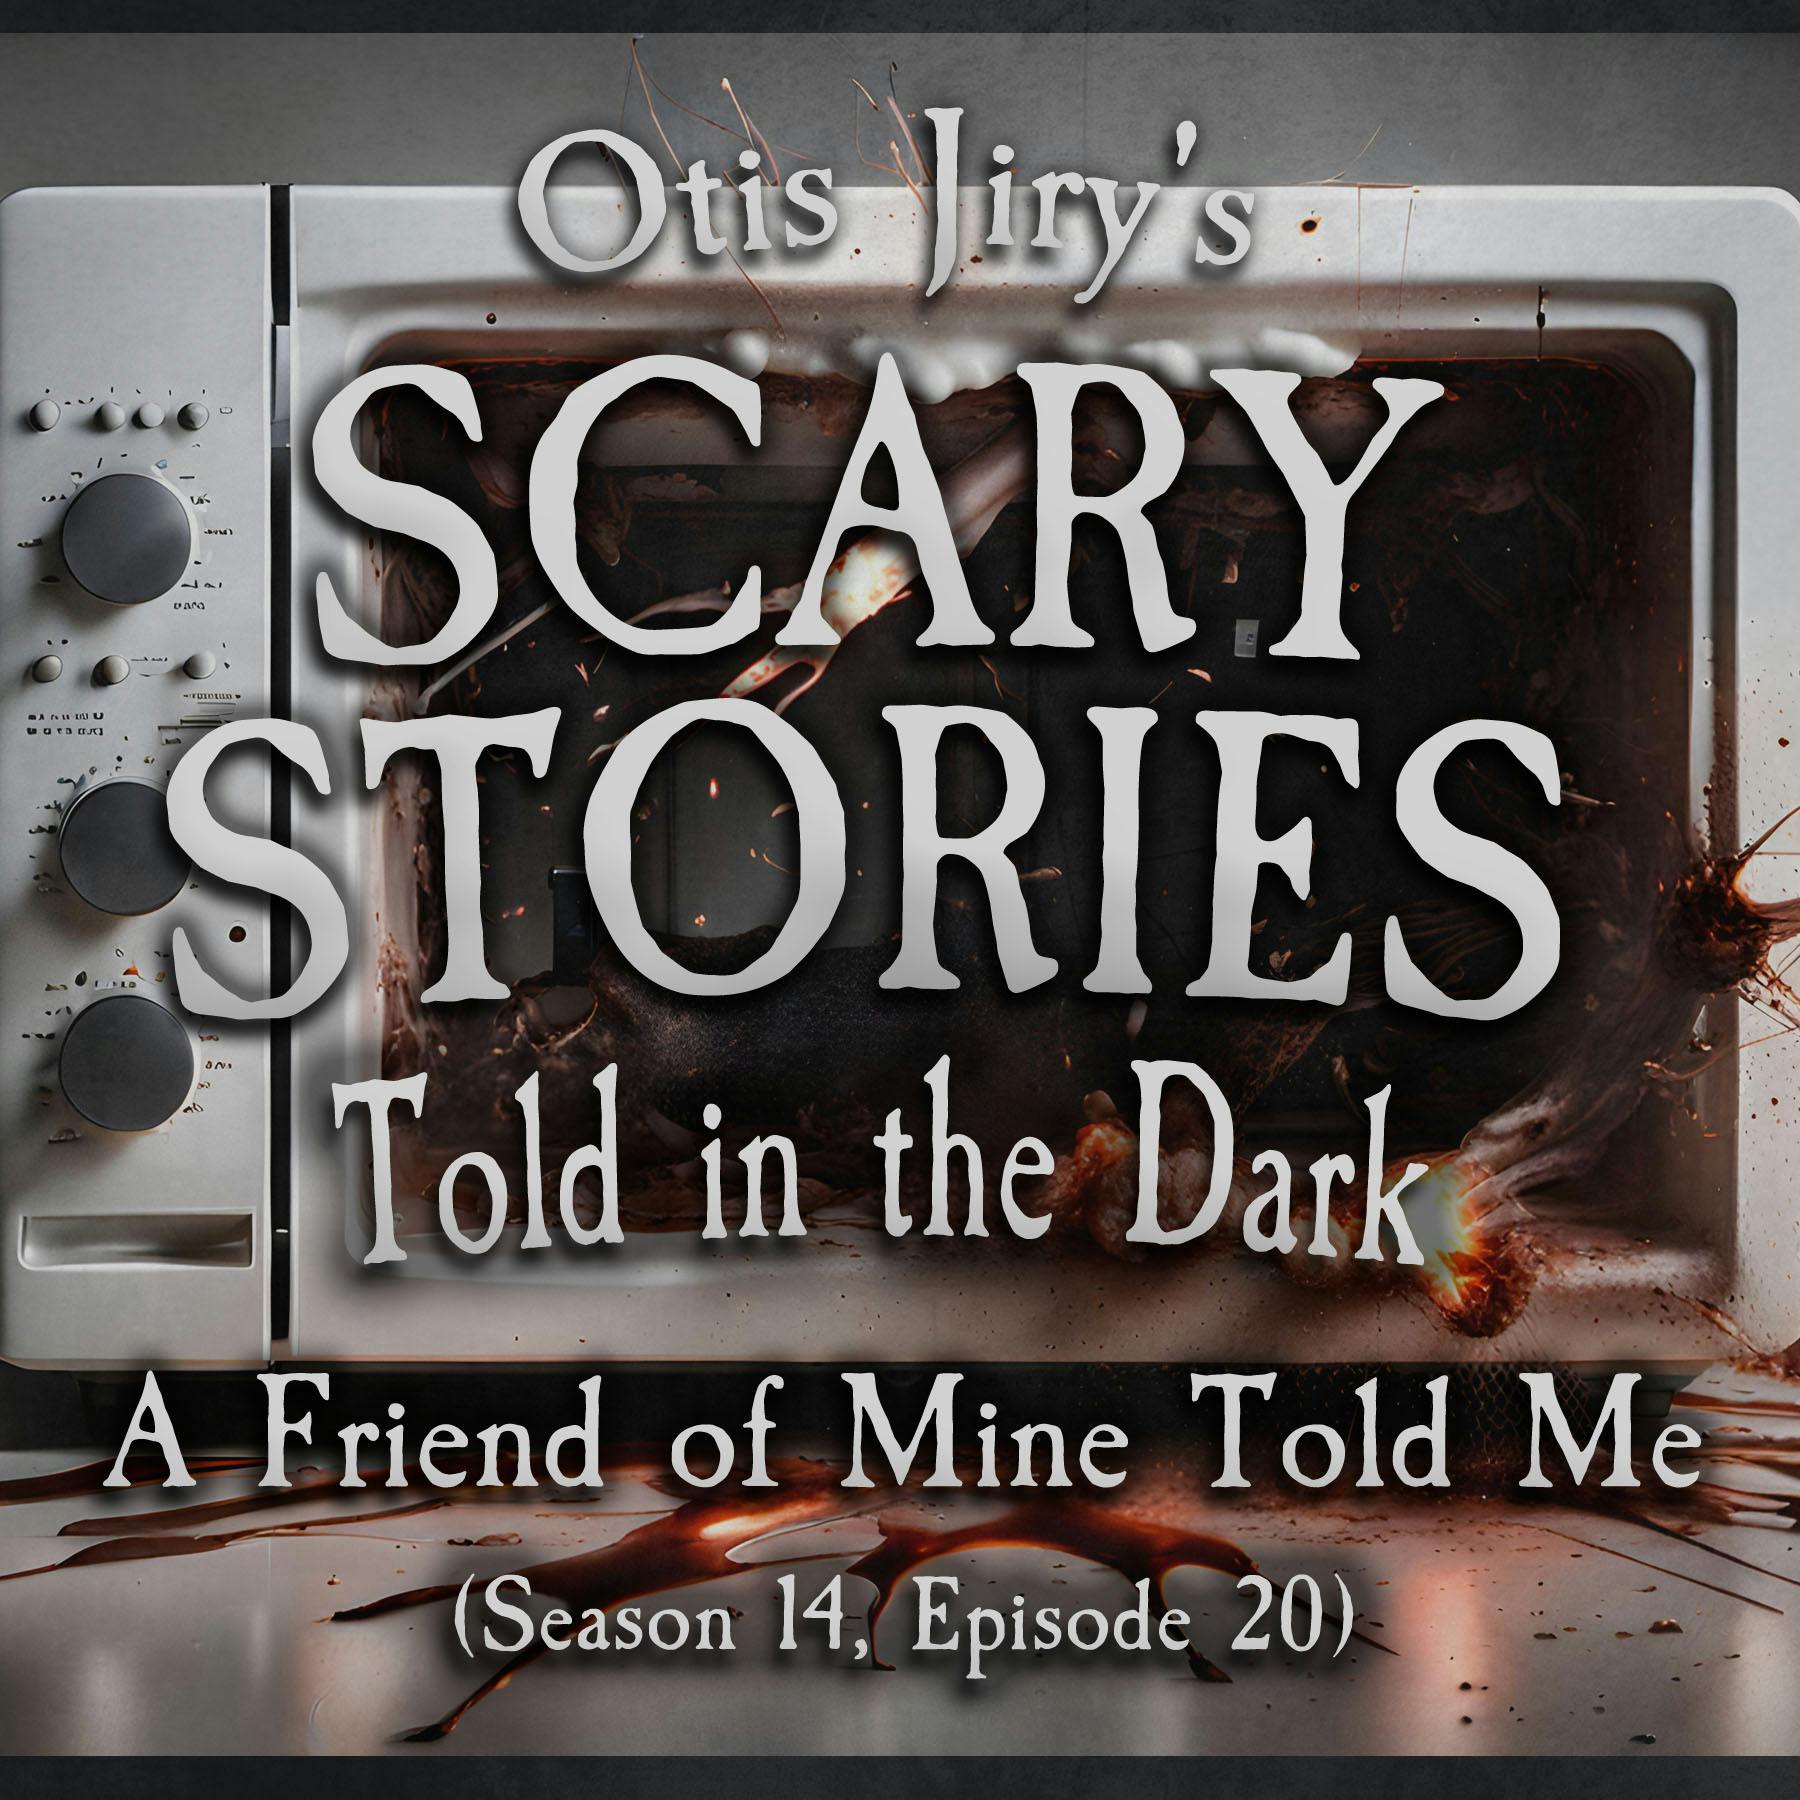 S14E20 - ”A Friend of Mine Told Me” – Scary Stories Told in the Dark